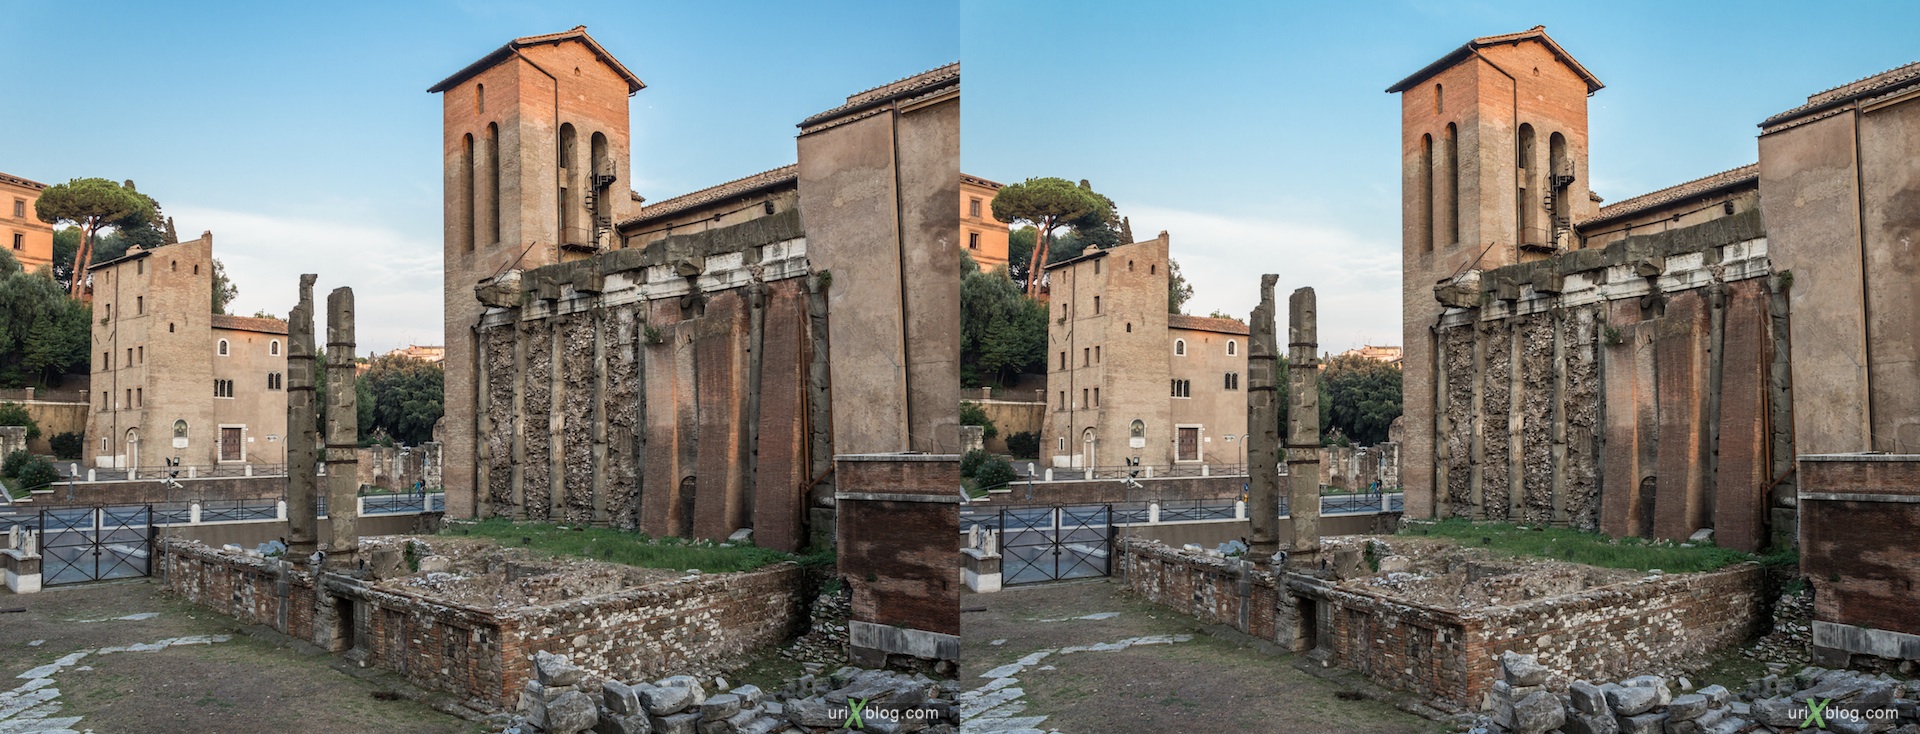 2012, church of San Nicola in Carcere, Rome, Italy, cathedral, monastery, Christianity, Catholicism, 3D, stereo pair, cross-eyed, crossview, cross view stereo pair